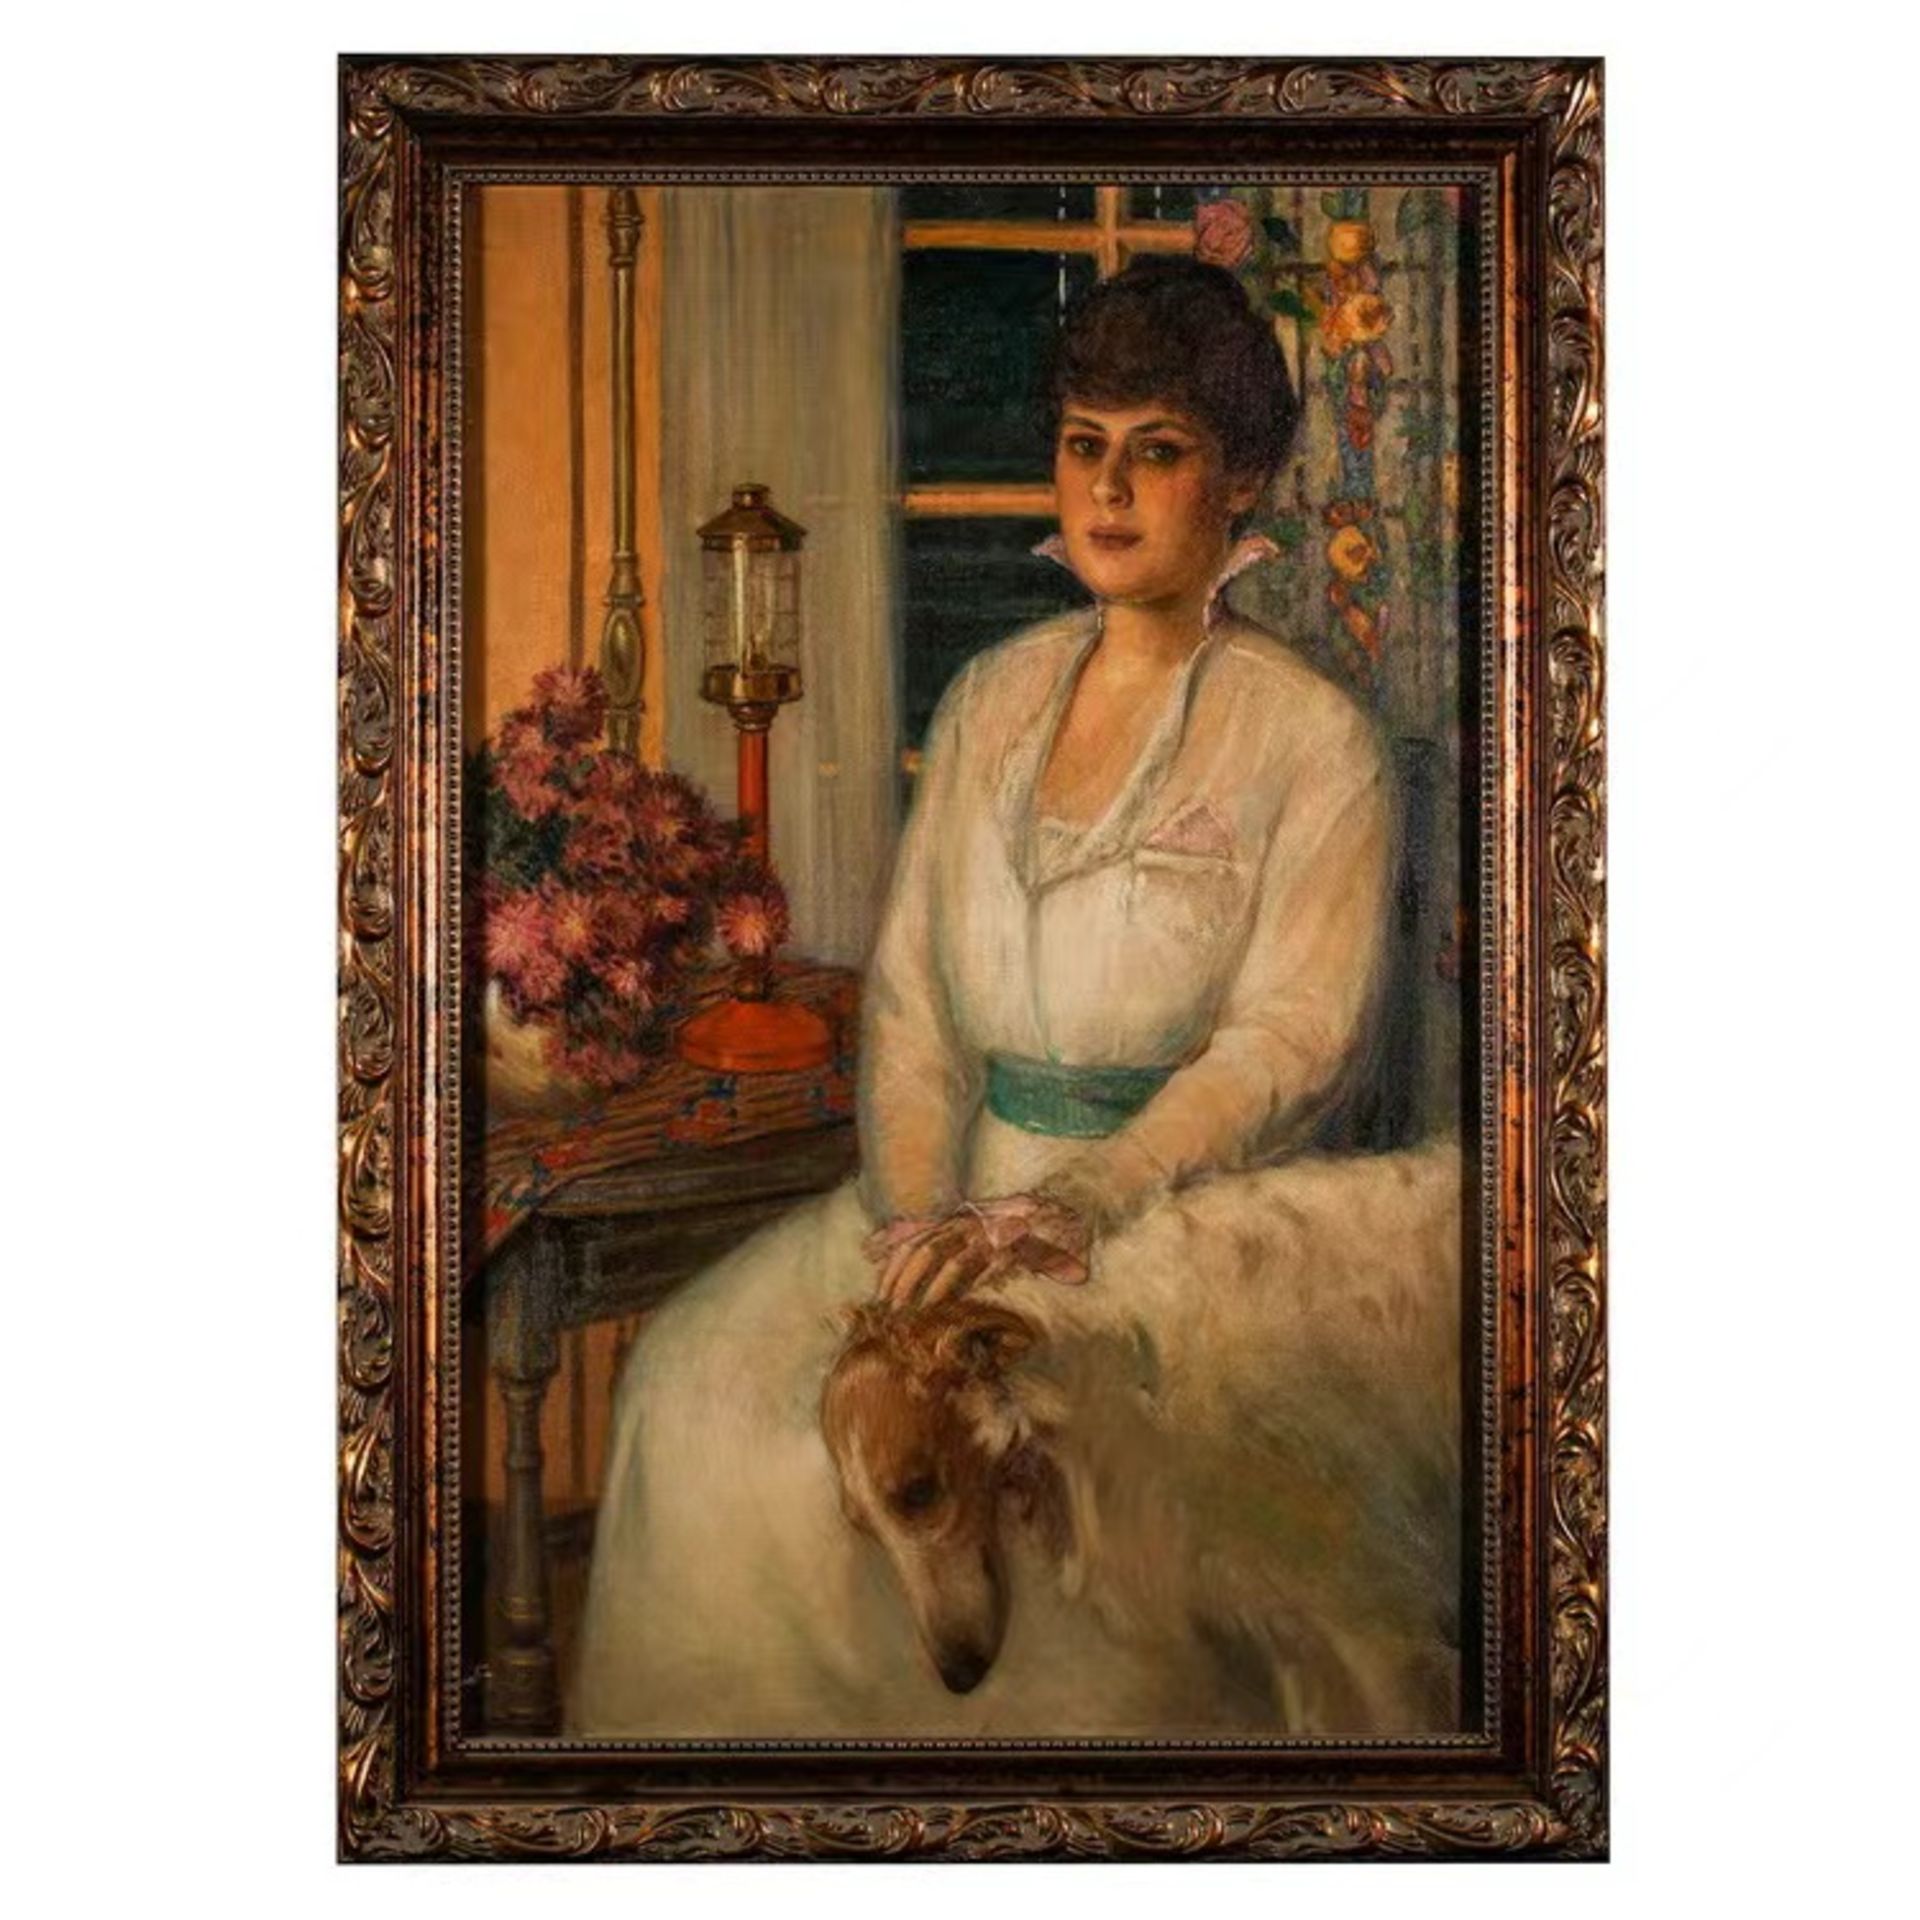 Women and Her Dog
Oil on canvas
（1876-1966，USA，by Joseph Mortimer Lichtenauer Jr）